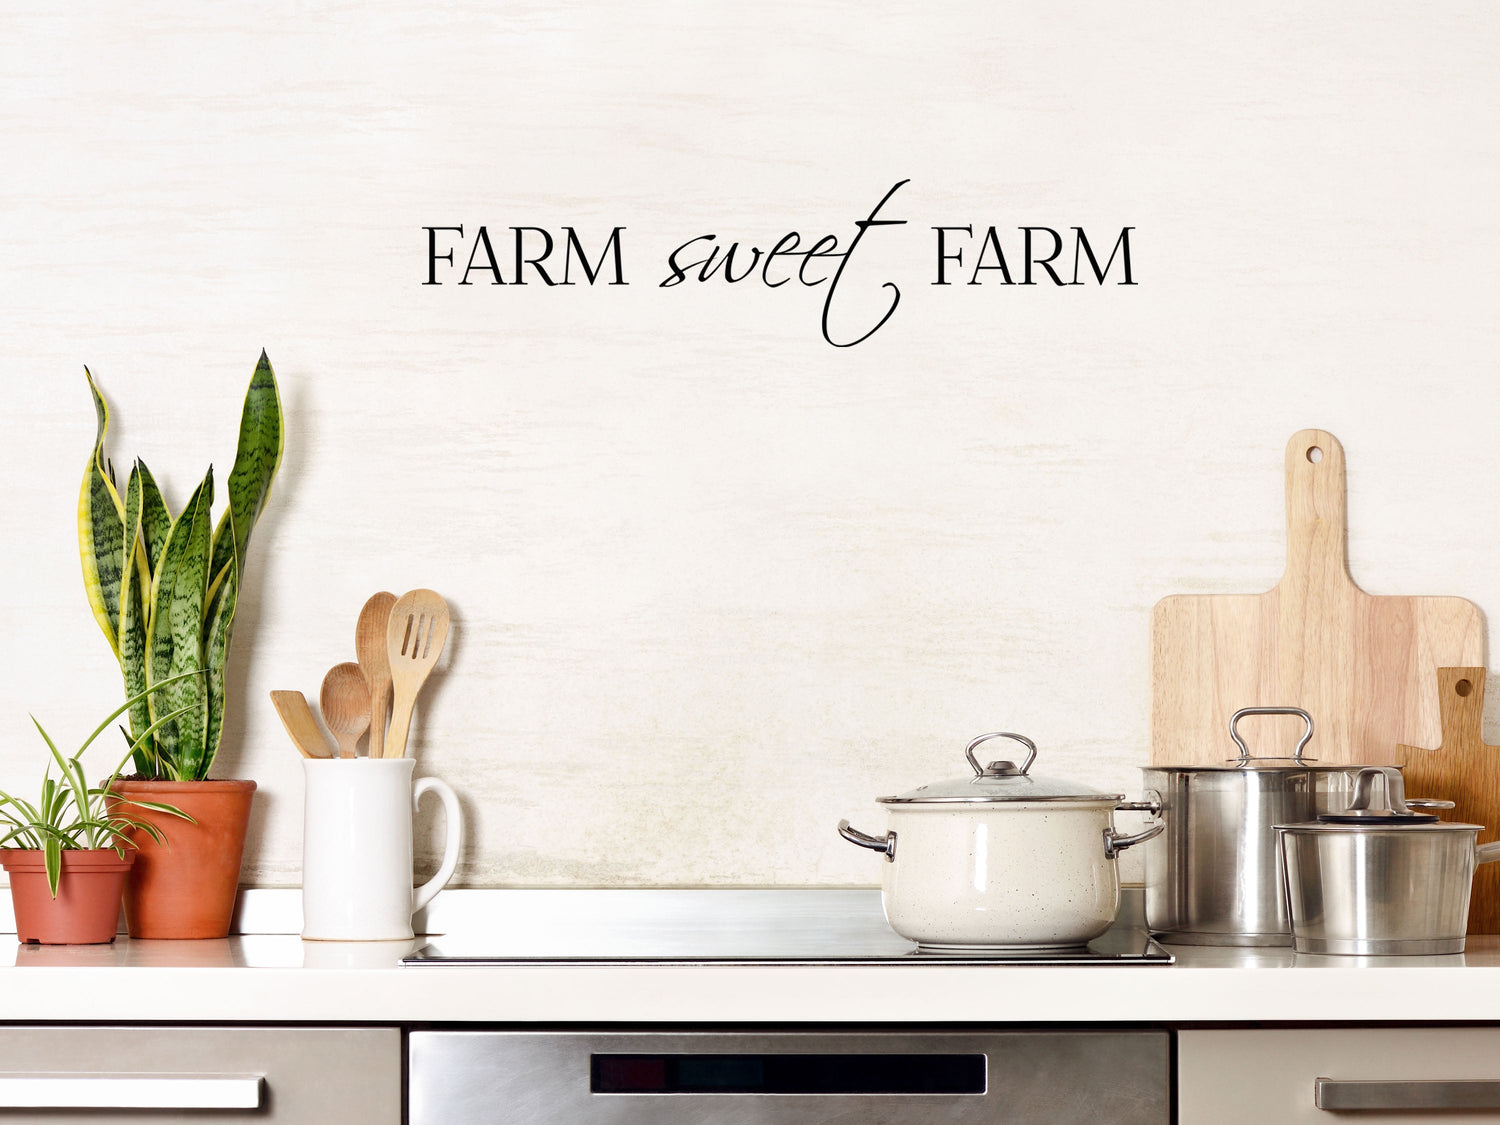 Farm Sweet Farm Wall Quote Decal - Vinyl Wall Decal Farming Decal - Country Farm Wall Decal Art - Farming Wall Quote Sticker - Kitchen Vinyl Wall Decal Title Done 